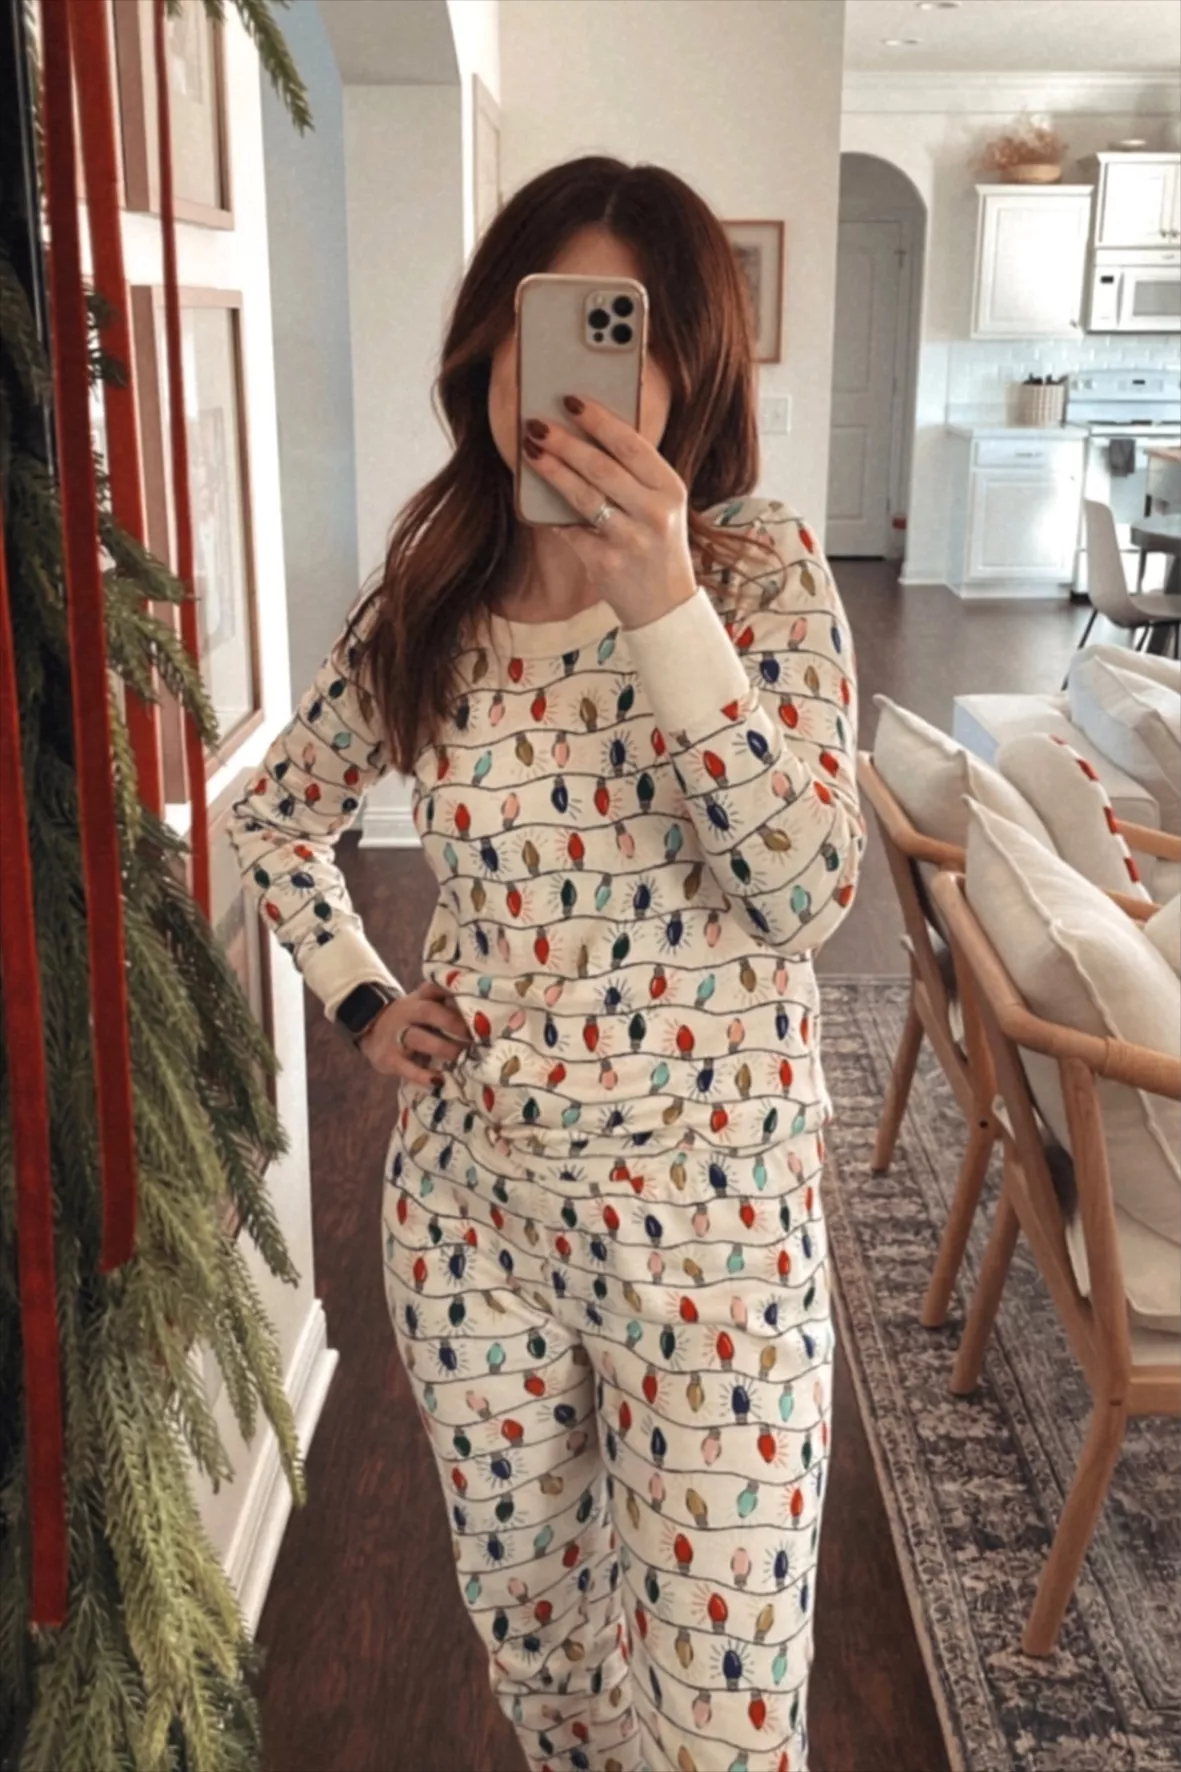 The Hanna Andersson Matching Pajamas Sale Has PJs up to 50% Off